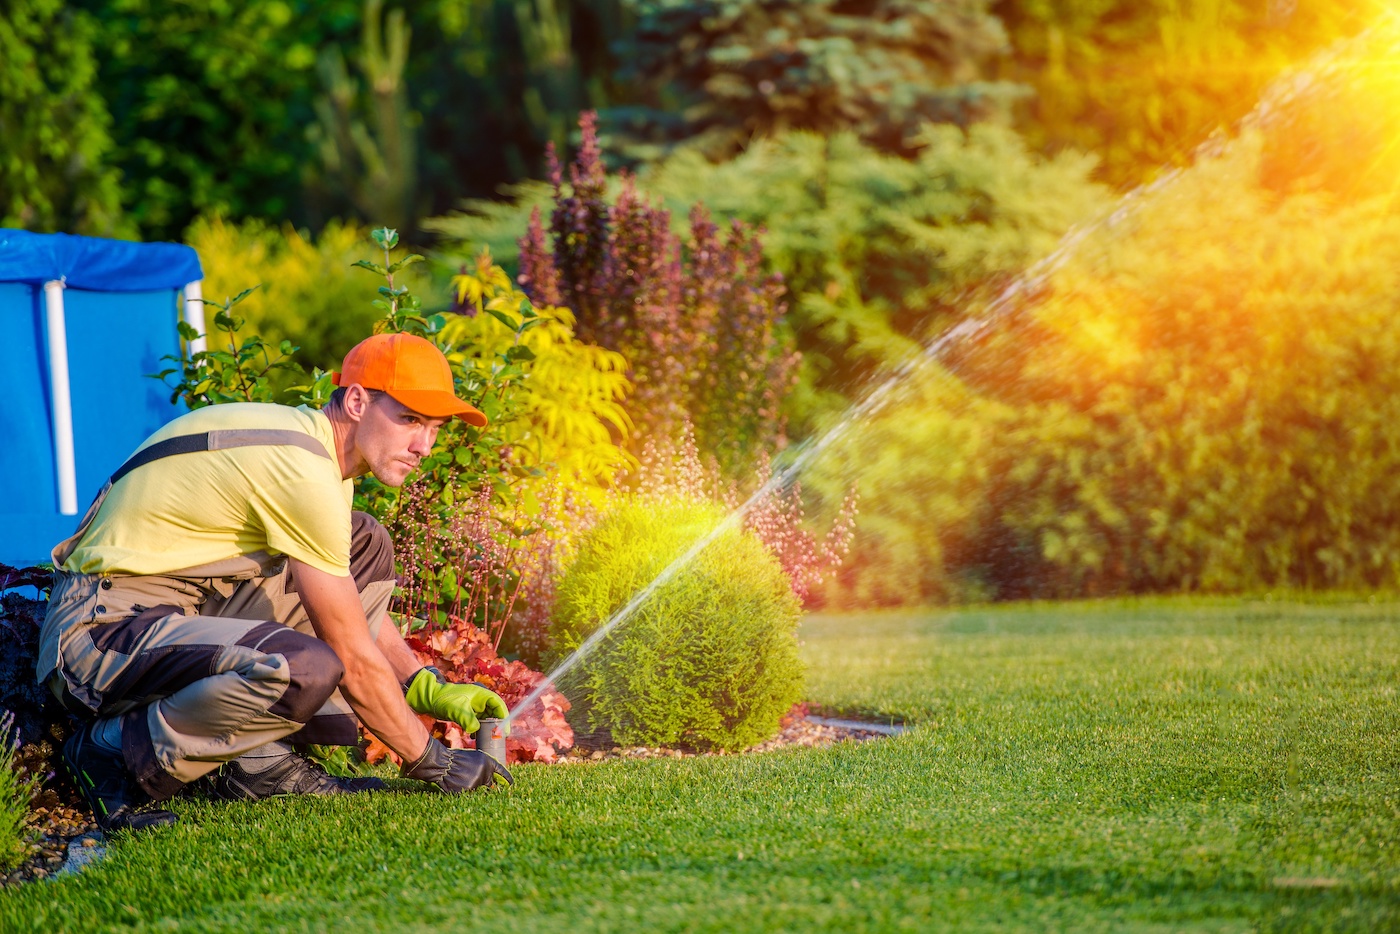 Lawn Care and Landscaping